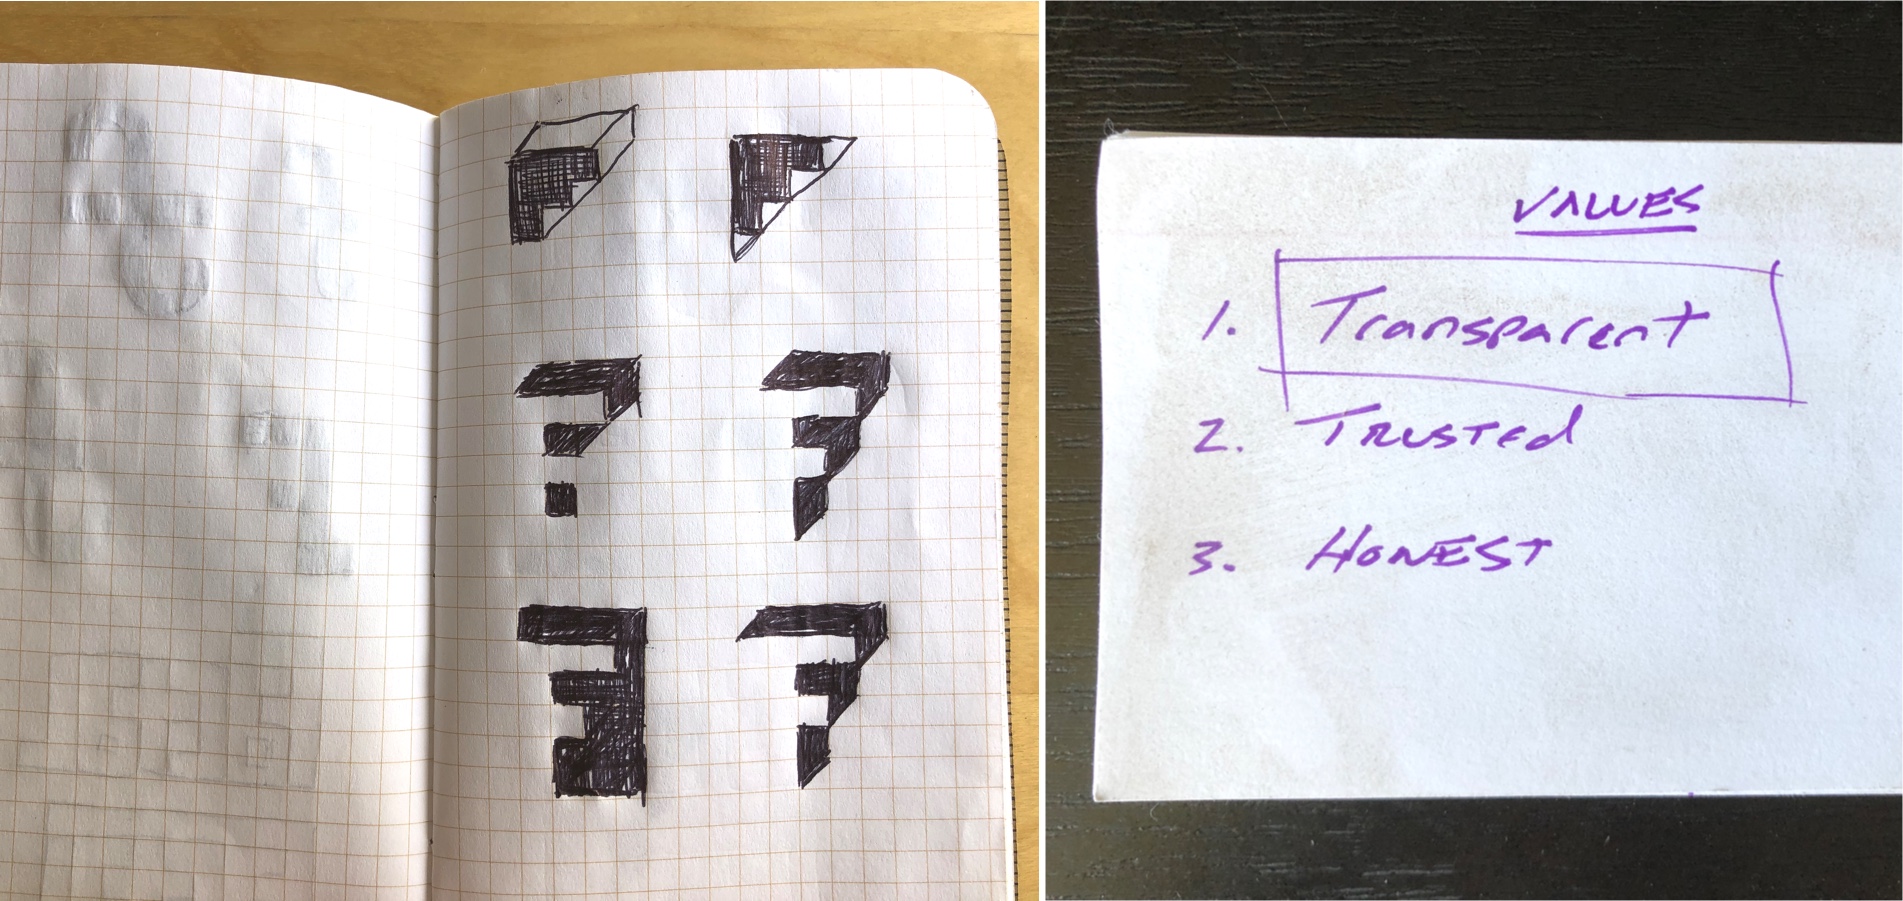 Two images next to each other. At left, an open notebook with square grid showing initial sketches of the Factal logo: a capital F surrounded by or bordered in stairstep shadow. At right, a handwritten purple note titled "Values" with three words under it: transparent, trusted, honest. Transparent has a box drawn around it.